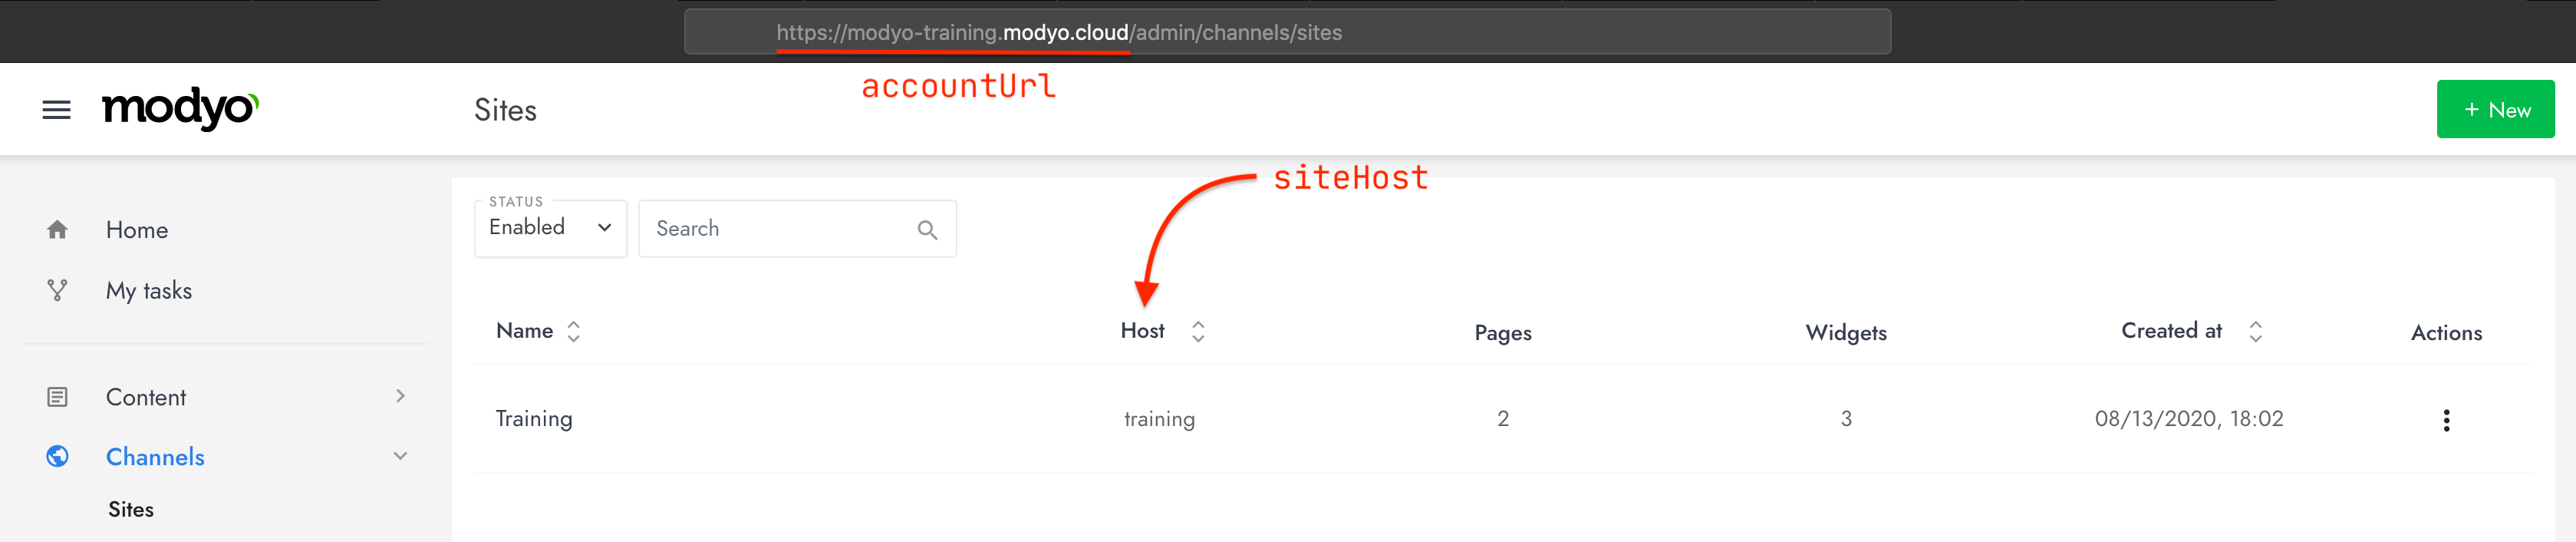 Image displaying where to find accountURL and siteHost